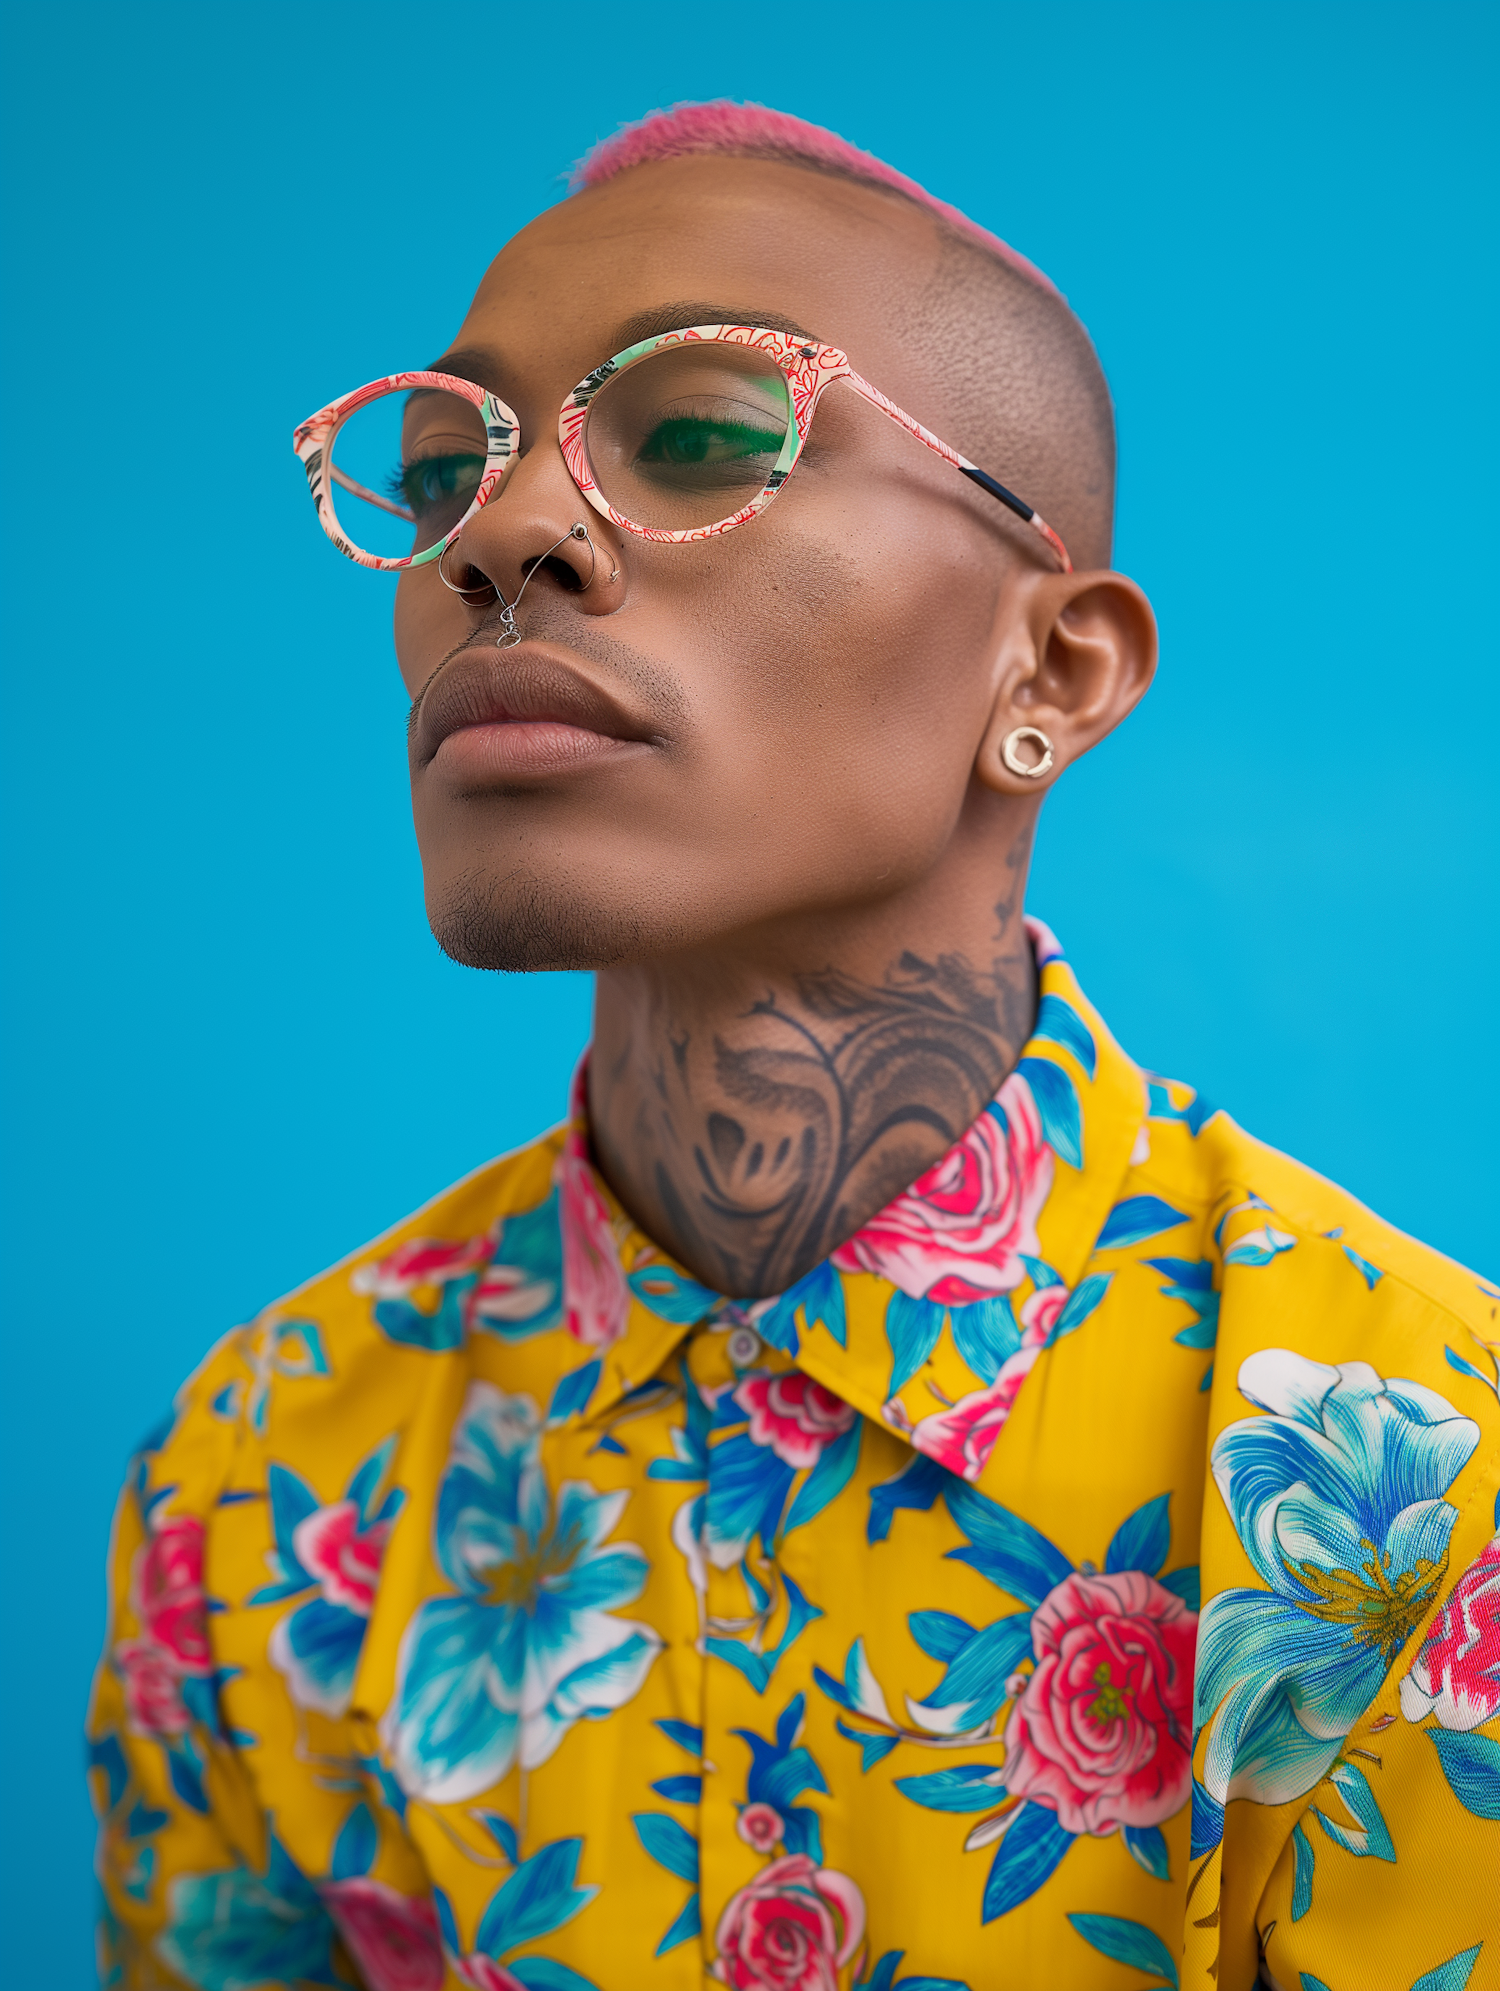 Stylish Portrait with Vibrant Colors and Tattoos